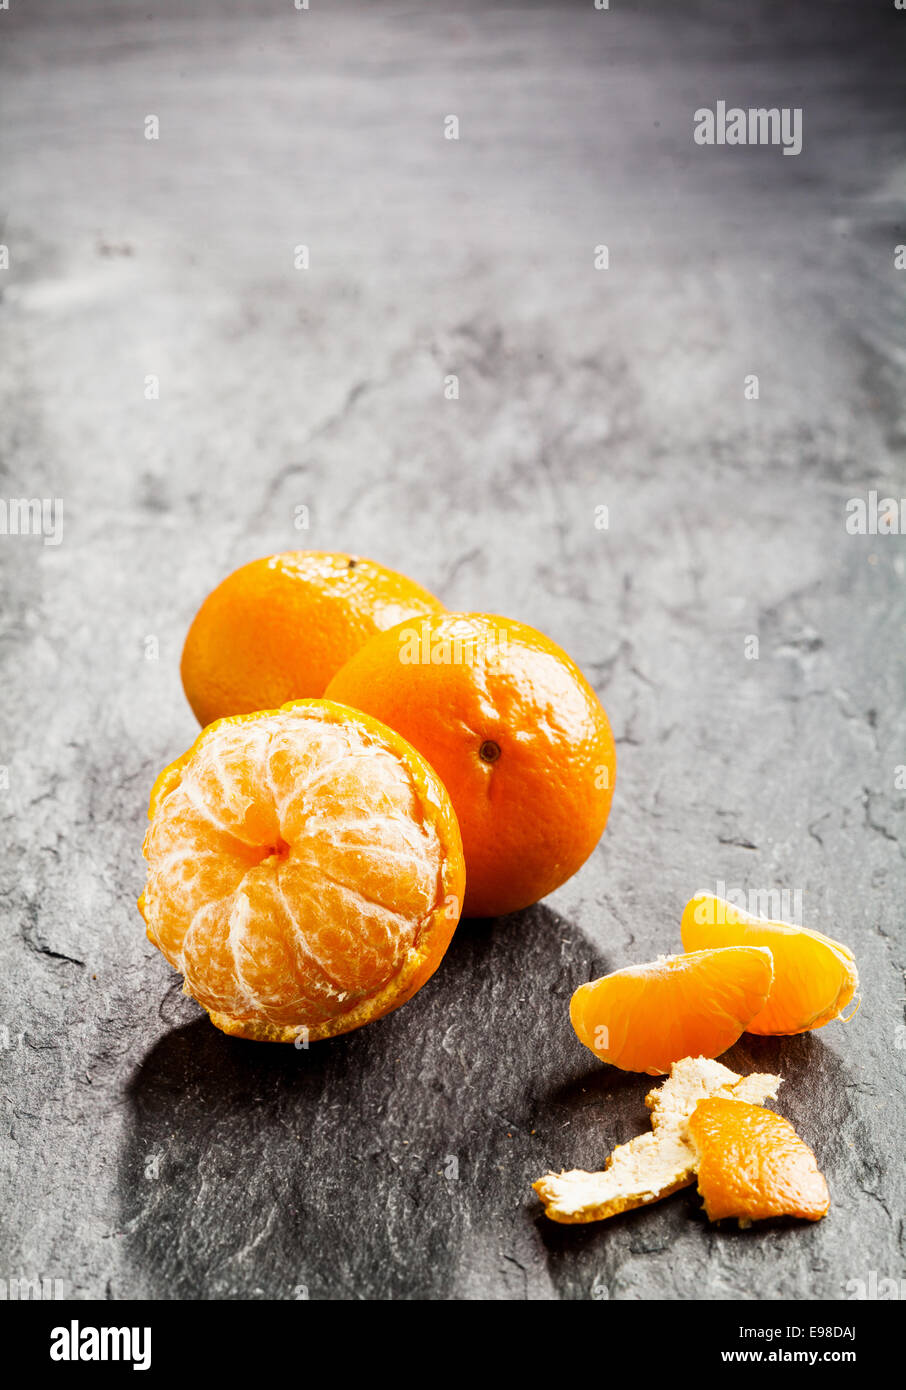 sweet Stock Alamy loose on clementine Peeled and fresh with segments scattered with background or dark Photo peel nectarine, - copyspace a tangerine